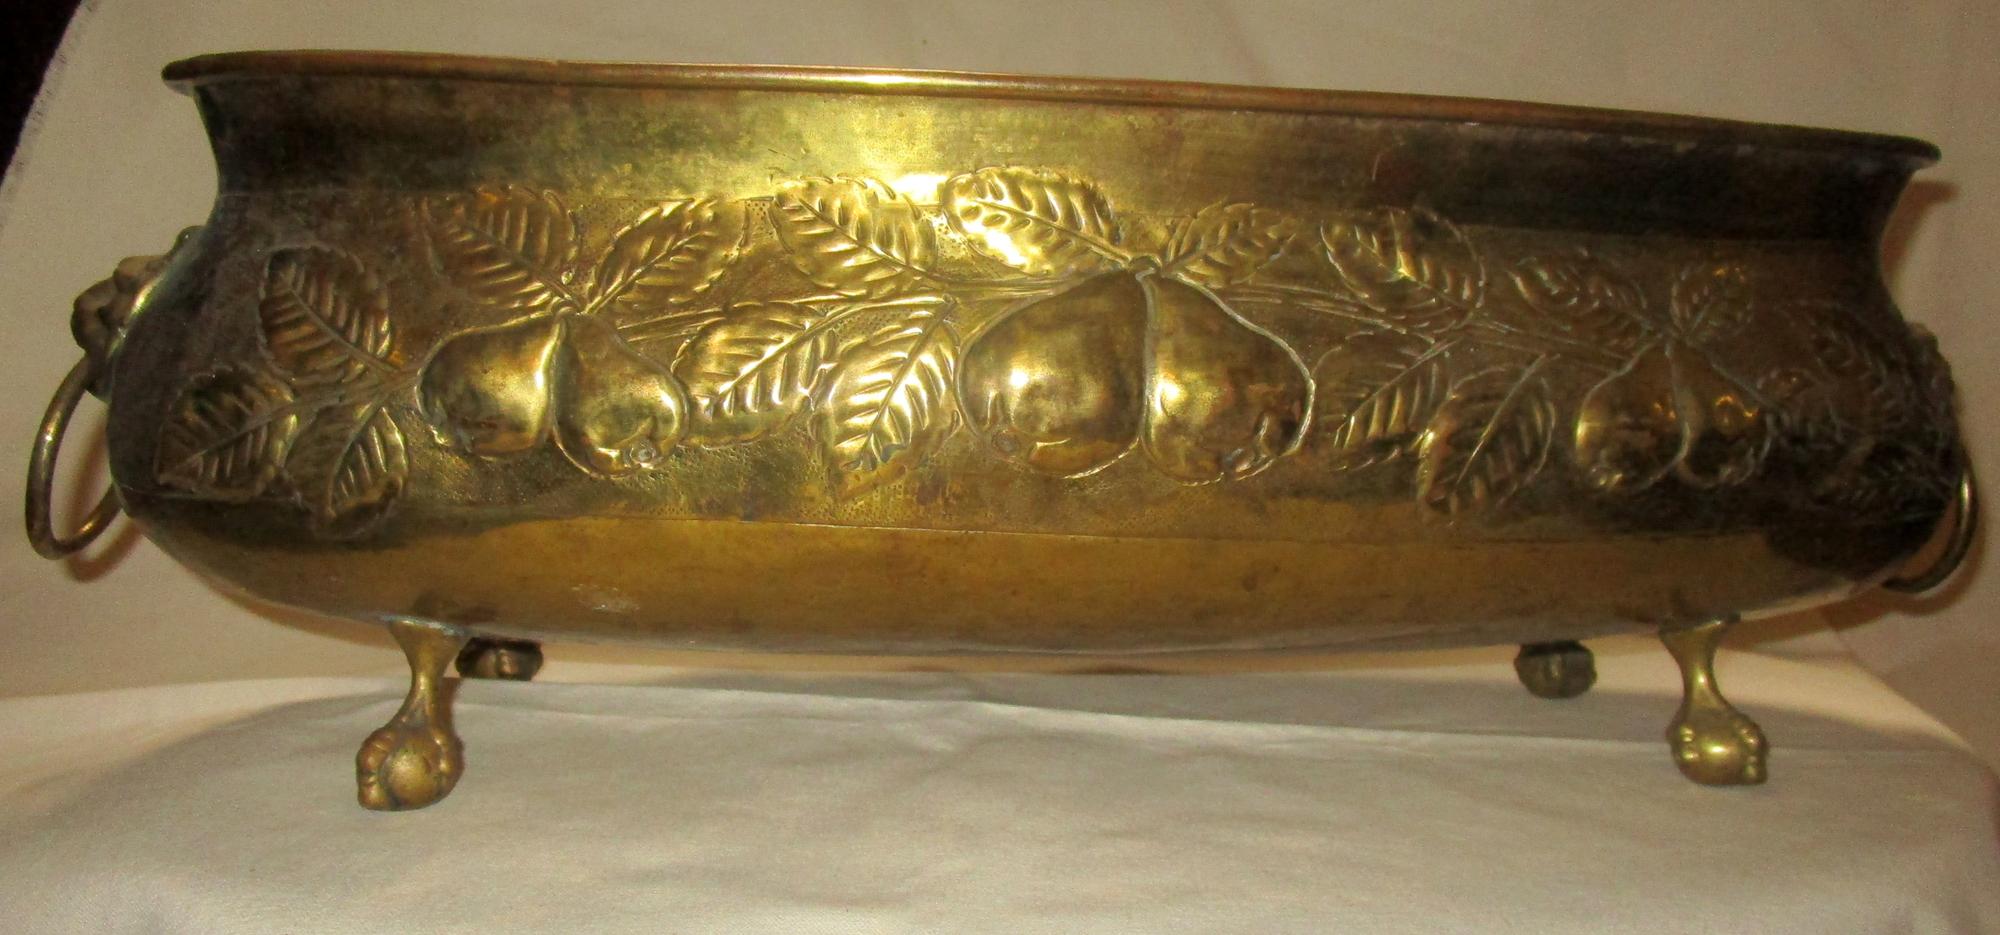 Late 19th Century 19th Century Brass Oval Jardinière or Planter with Fruit Motif